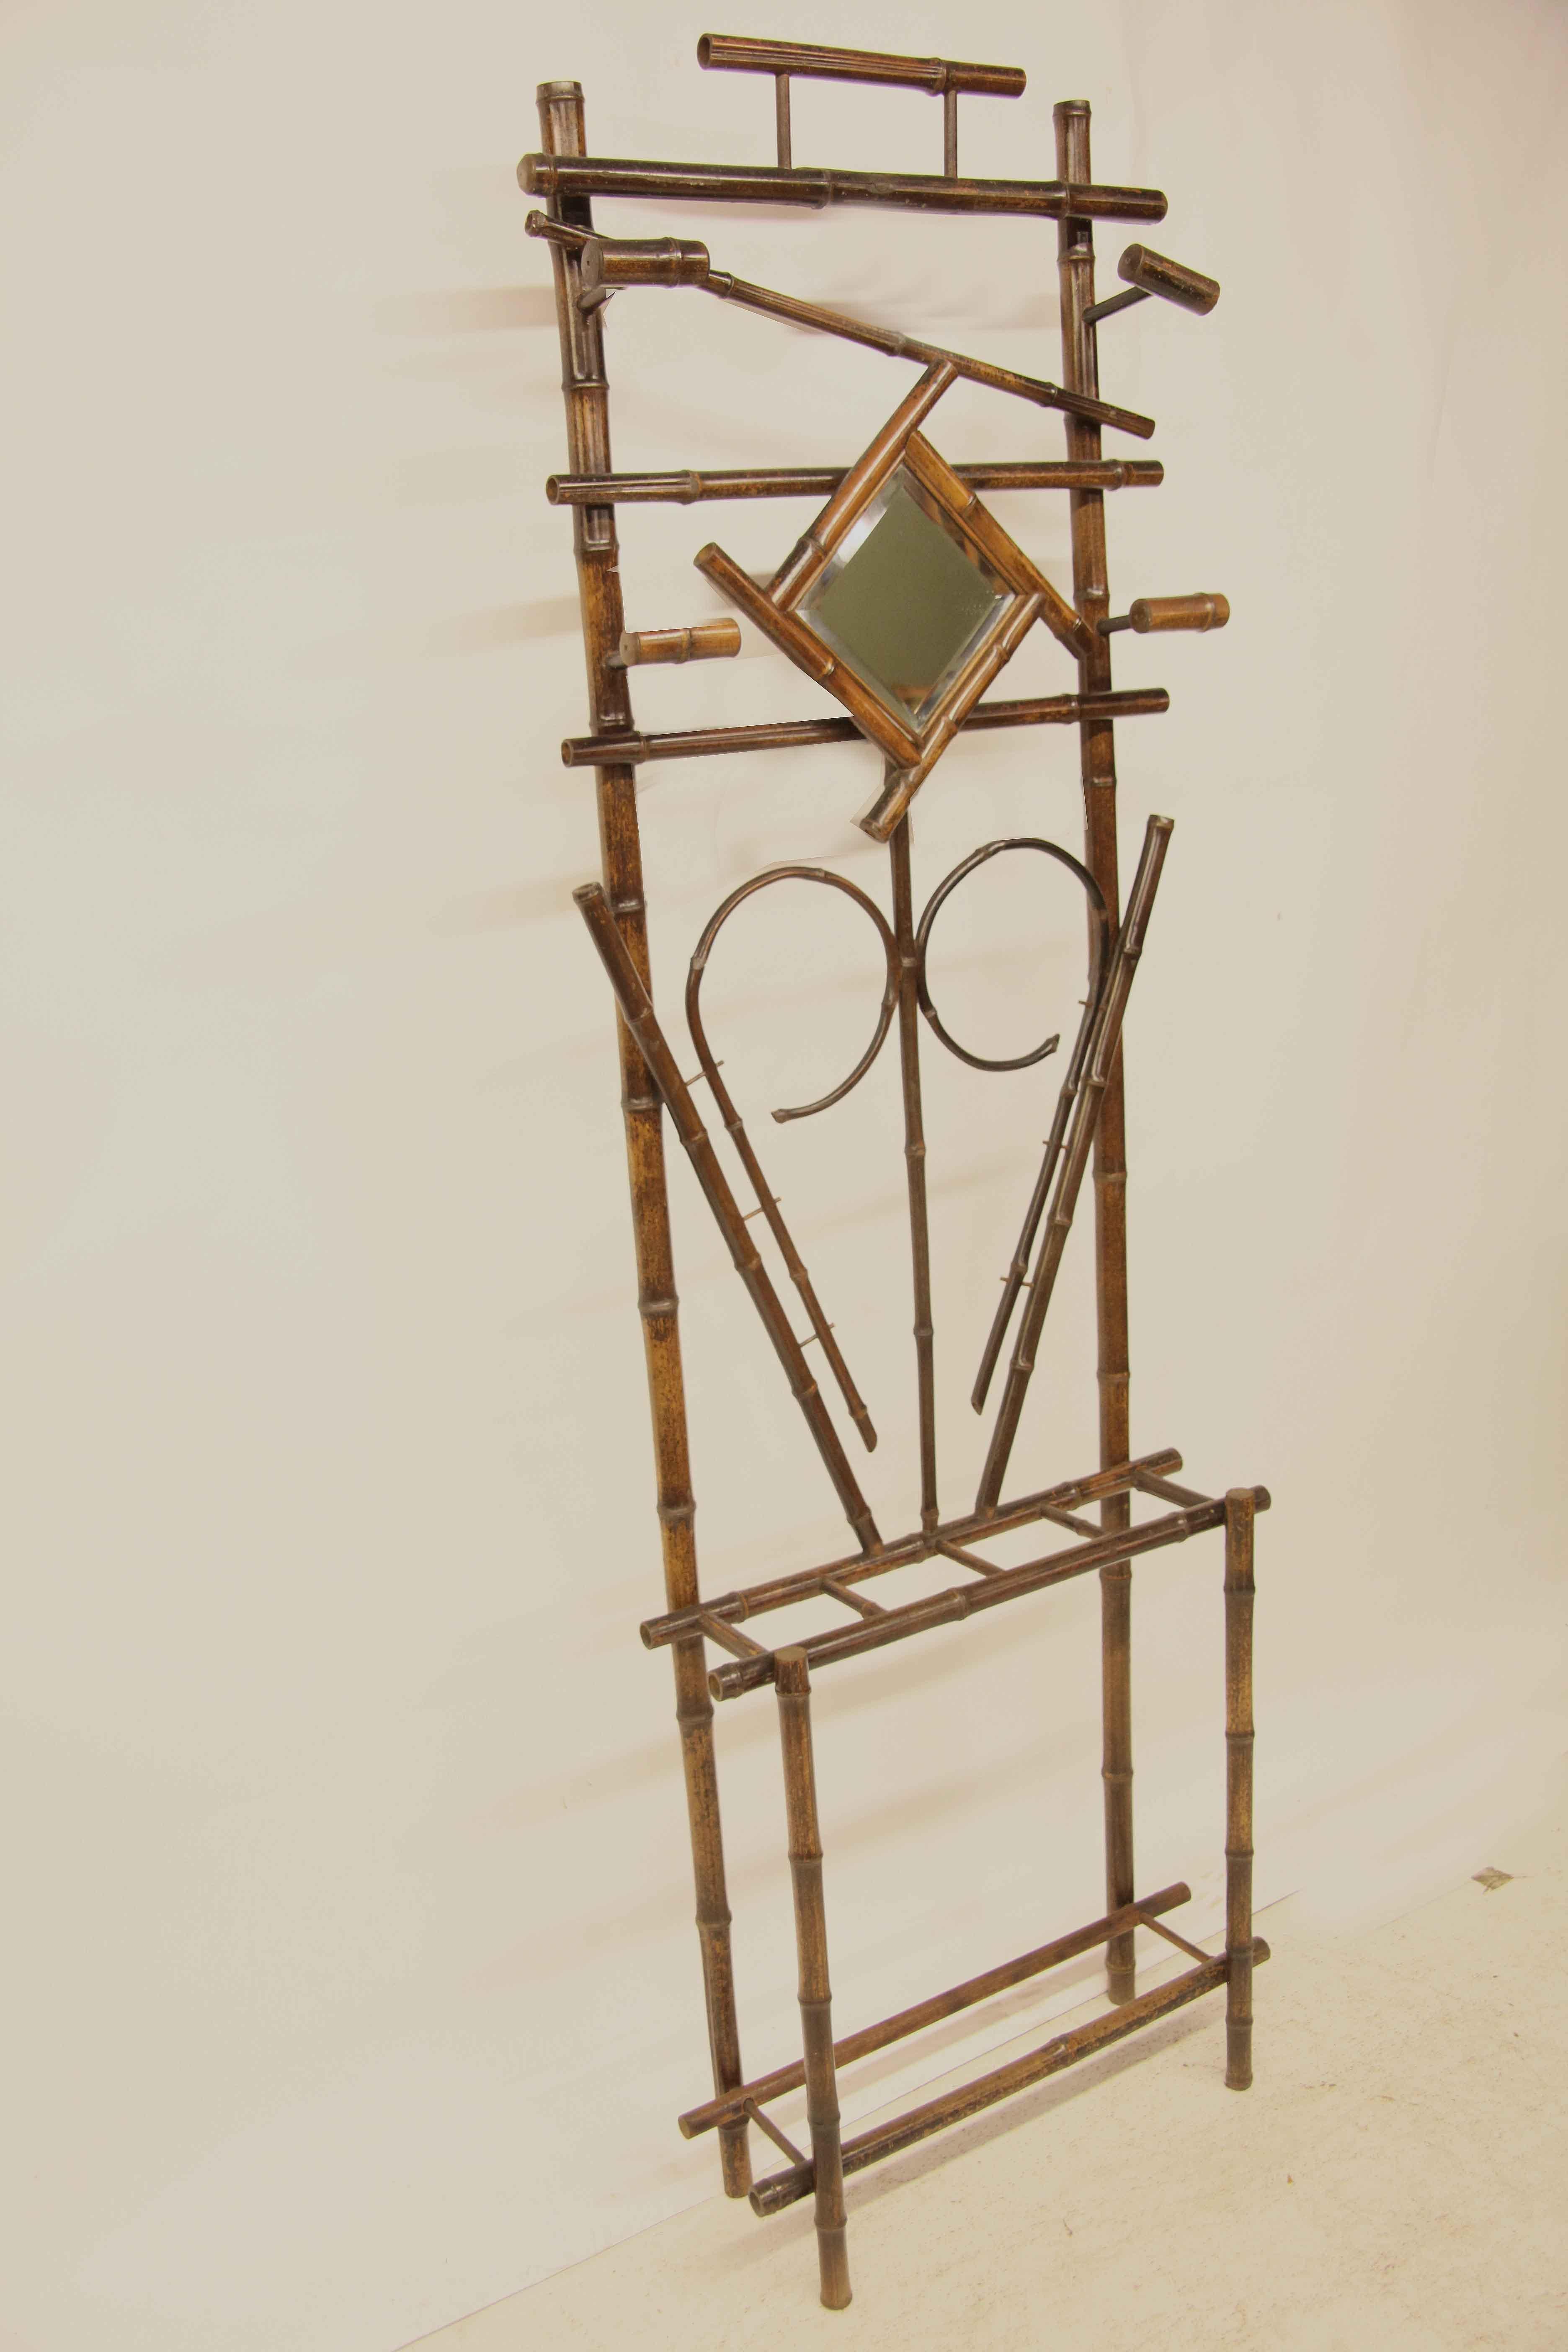 English bamboo hall stand, upper portion with four bamboo coat or hat holders and original beveled glass mirror, lower portion with four divisions for canes or umbrellas.